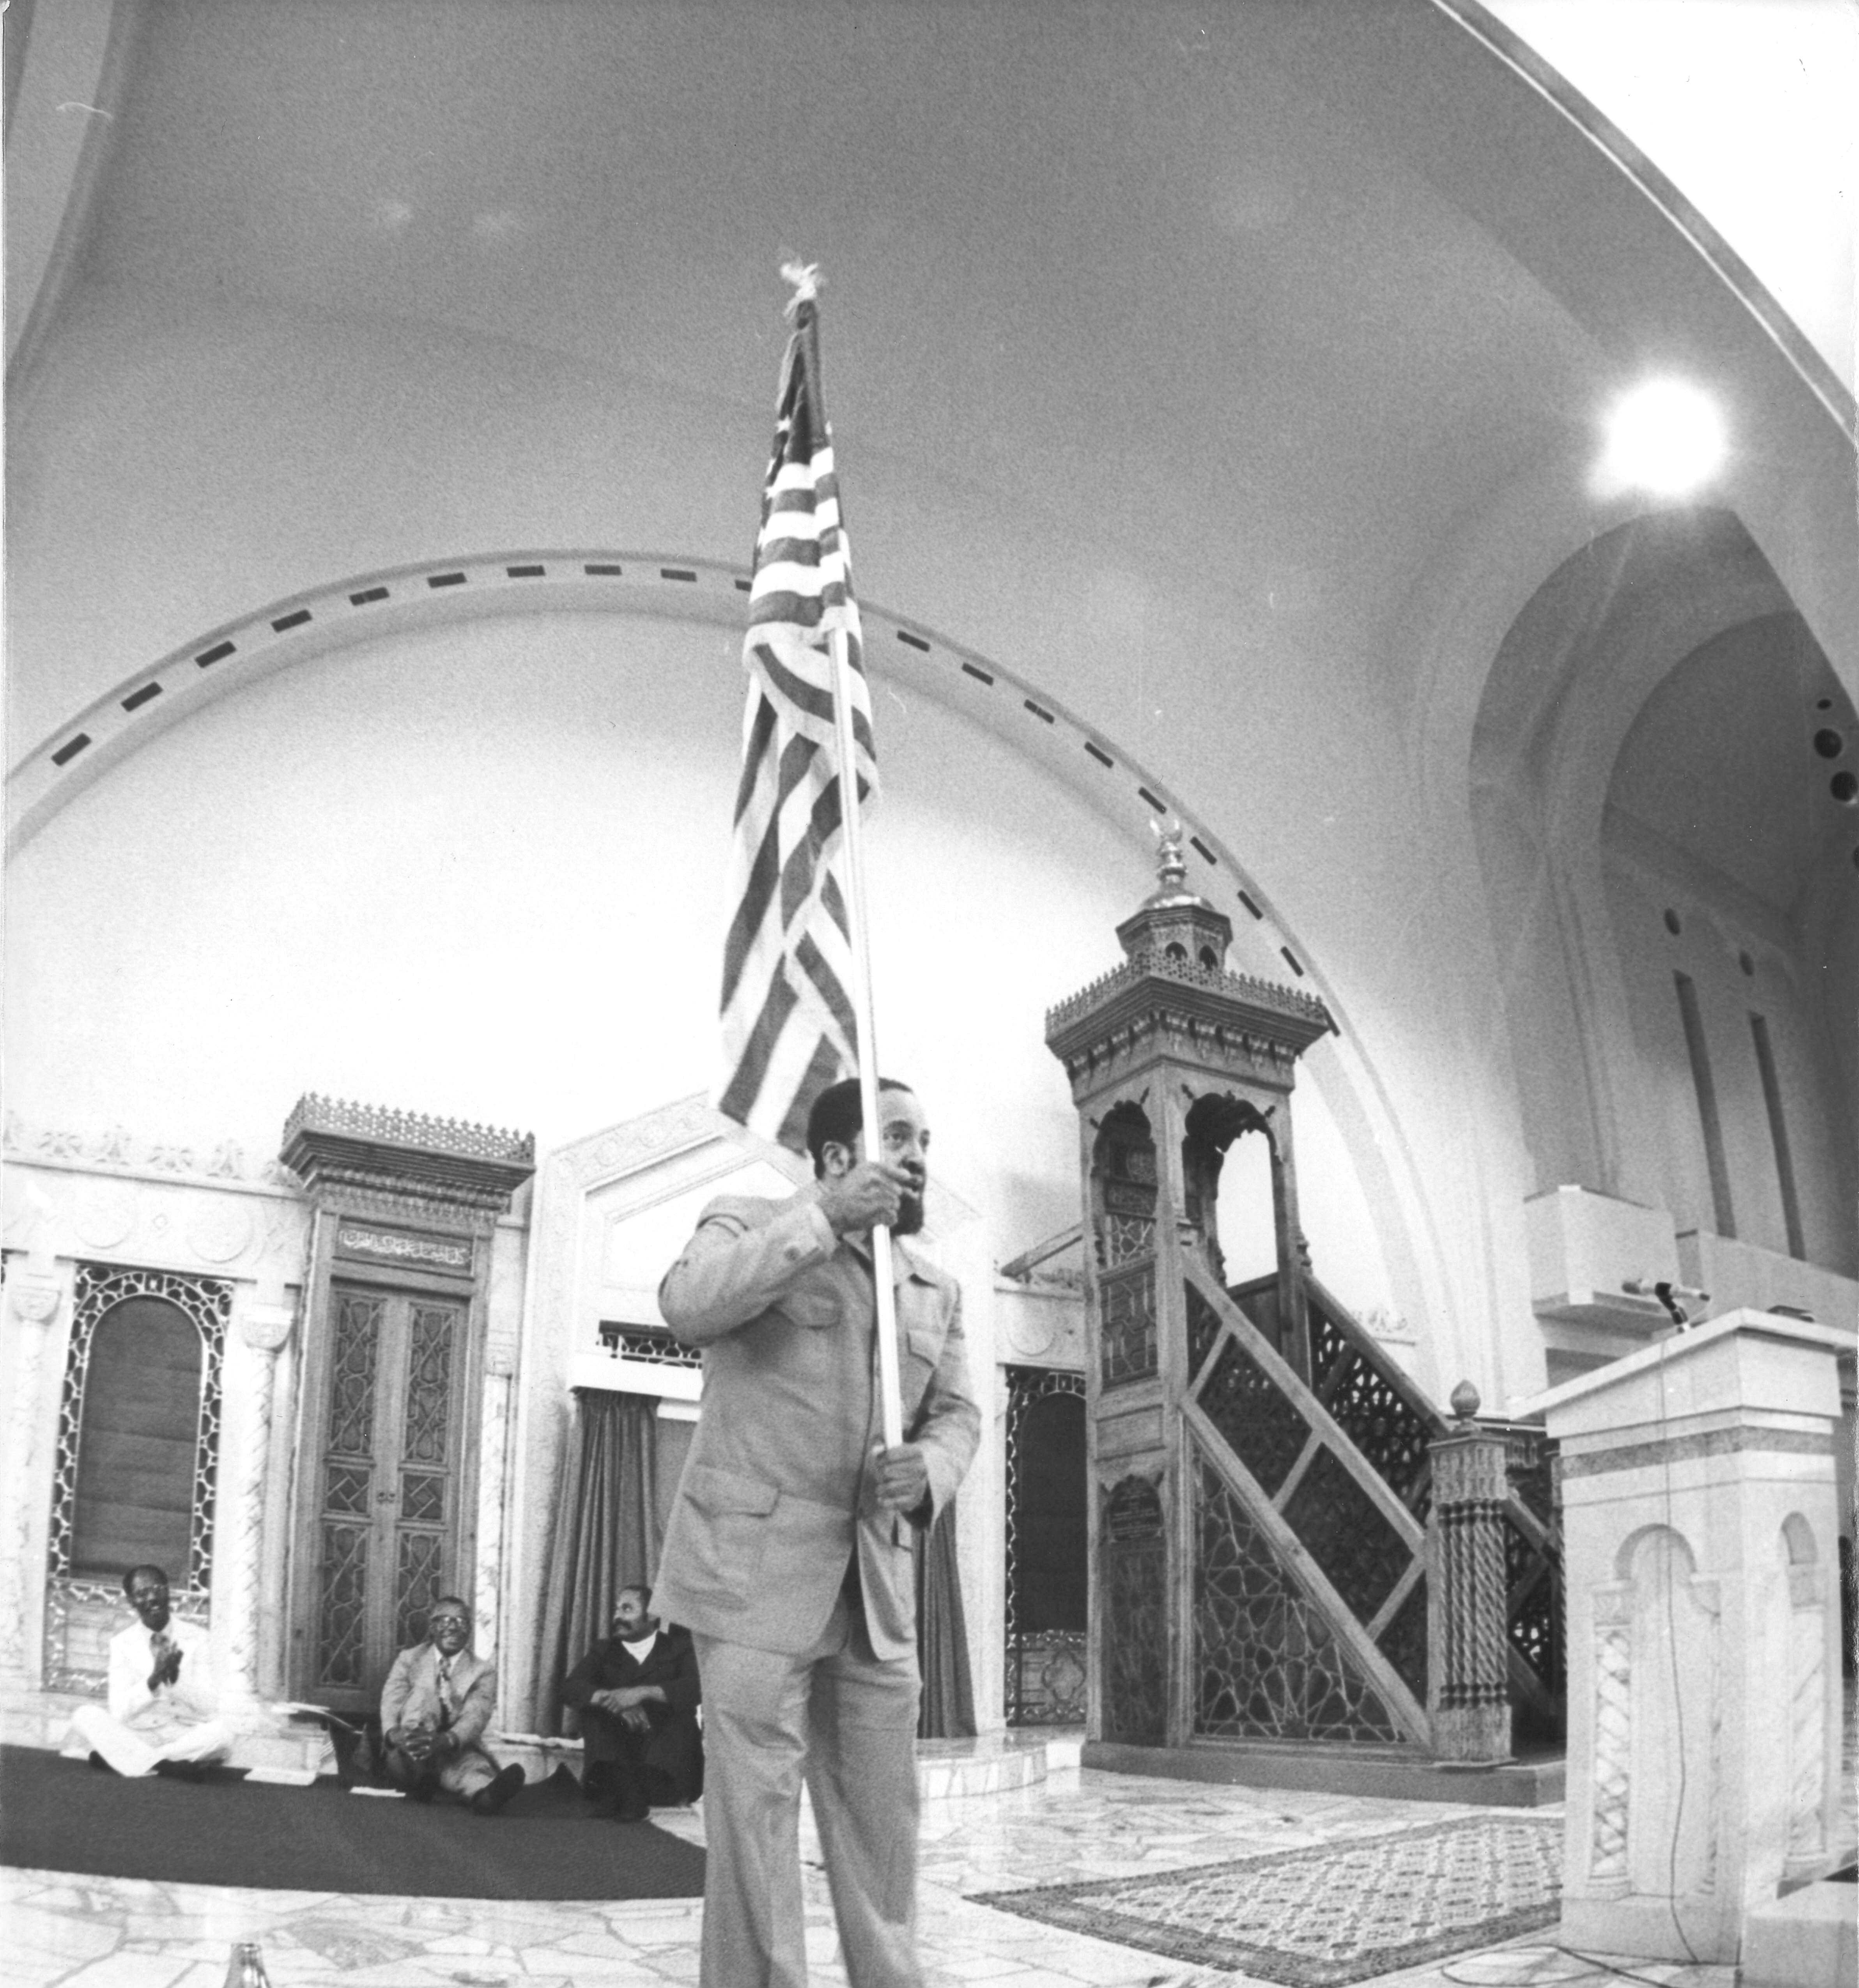 Photograph of Imam Warith Deen Mohammed carries American flag as a symbol of the nation’s obligation to promote equality for all its citizens.